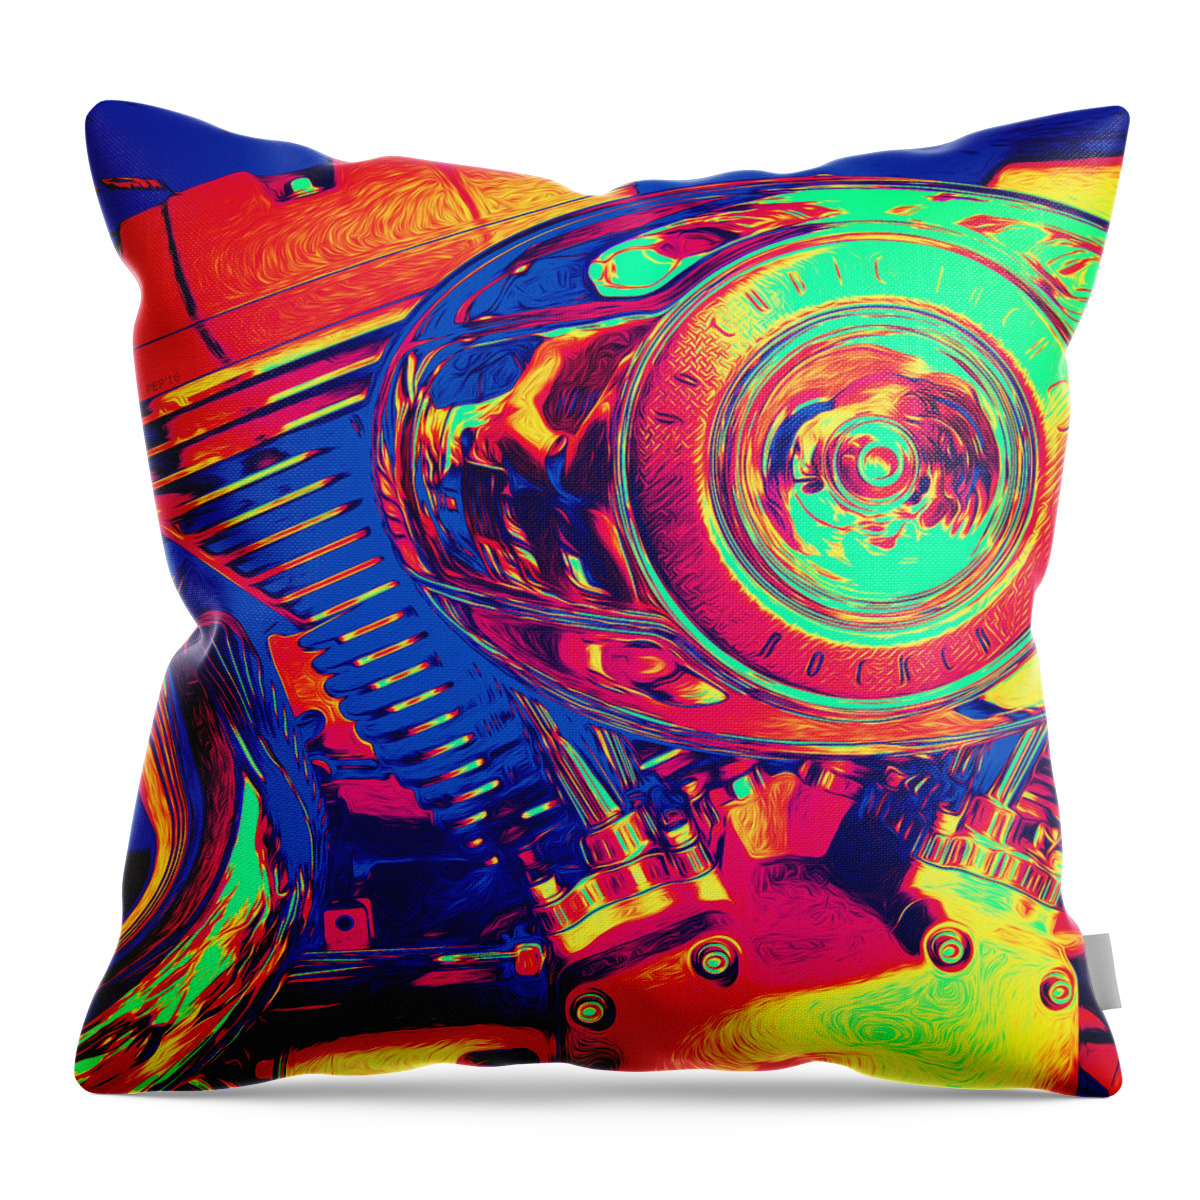 Motor Throw Pillow featuring the photograph Colorful Motorcycle Engine by Phil Perkins